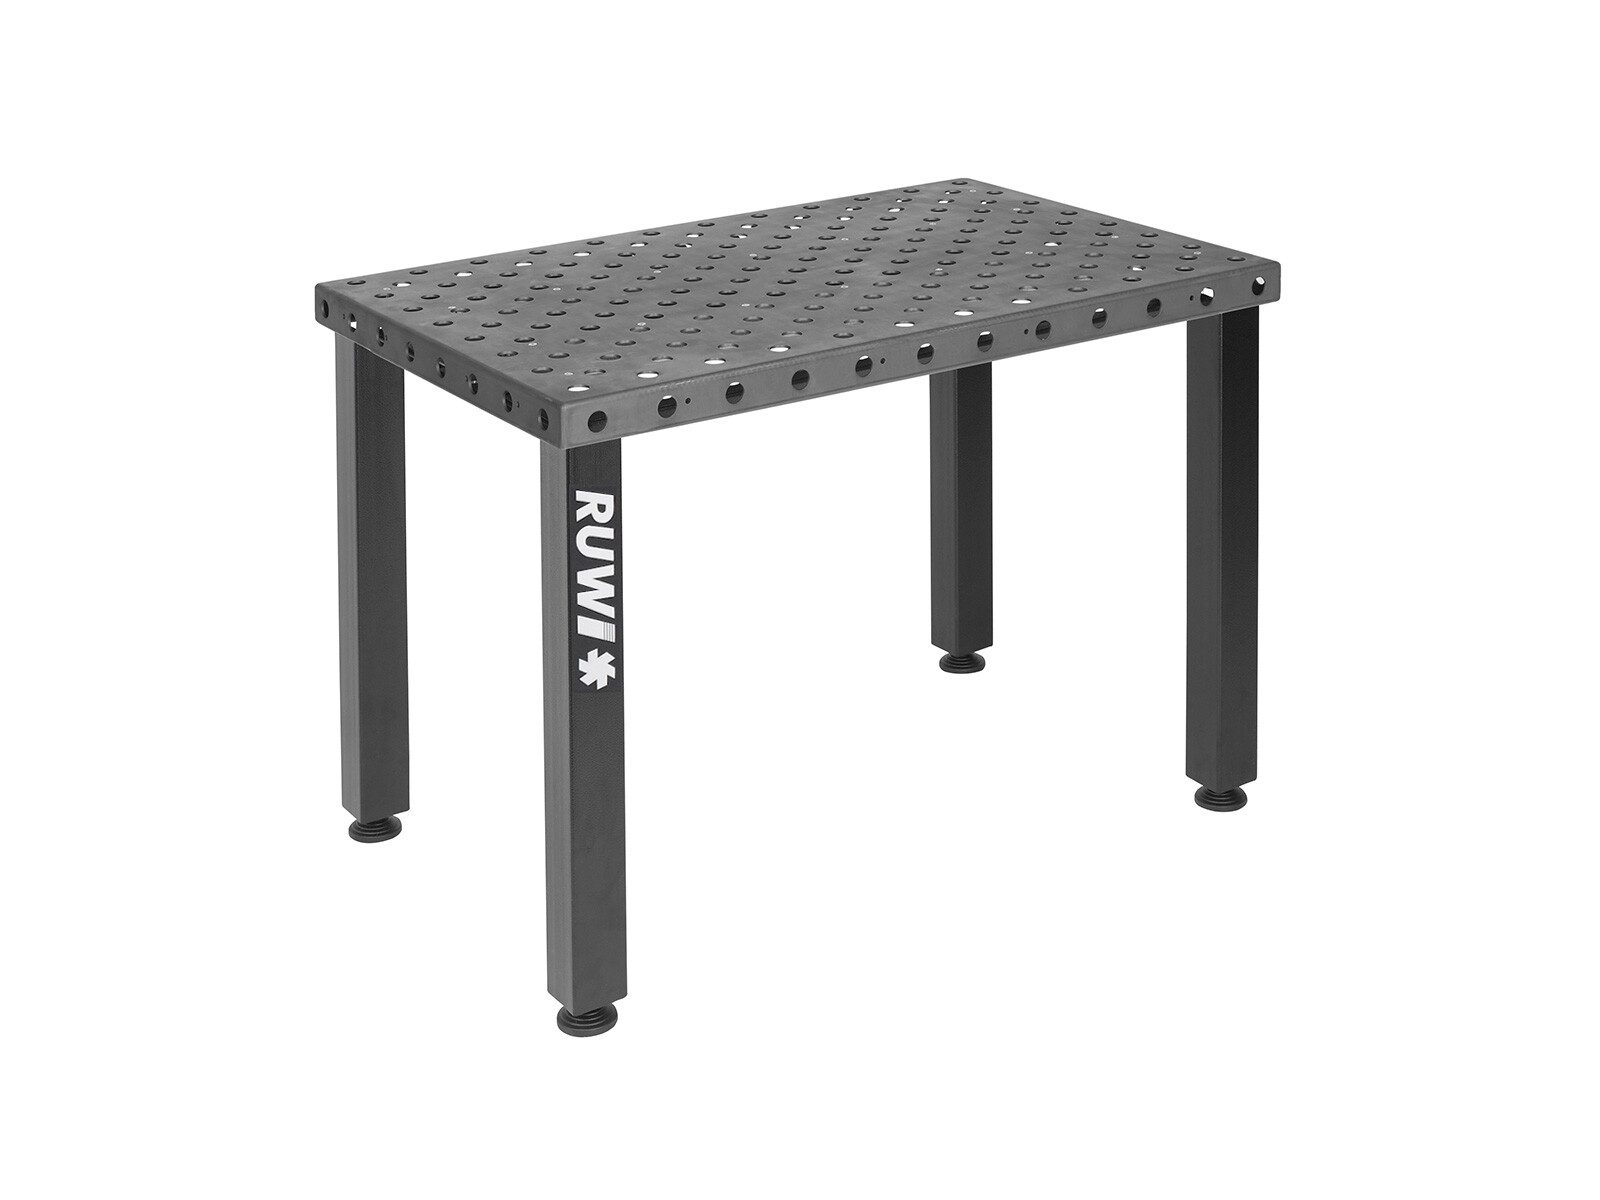 Welding table / leg table 120 x 80 cm with perforated grid plate ø28 mm